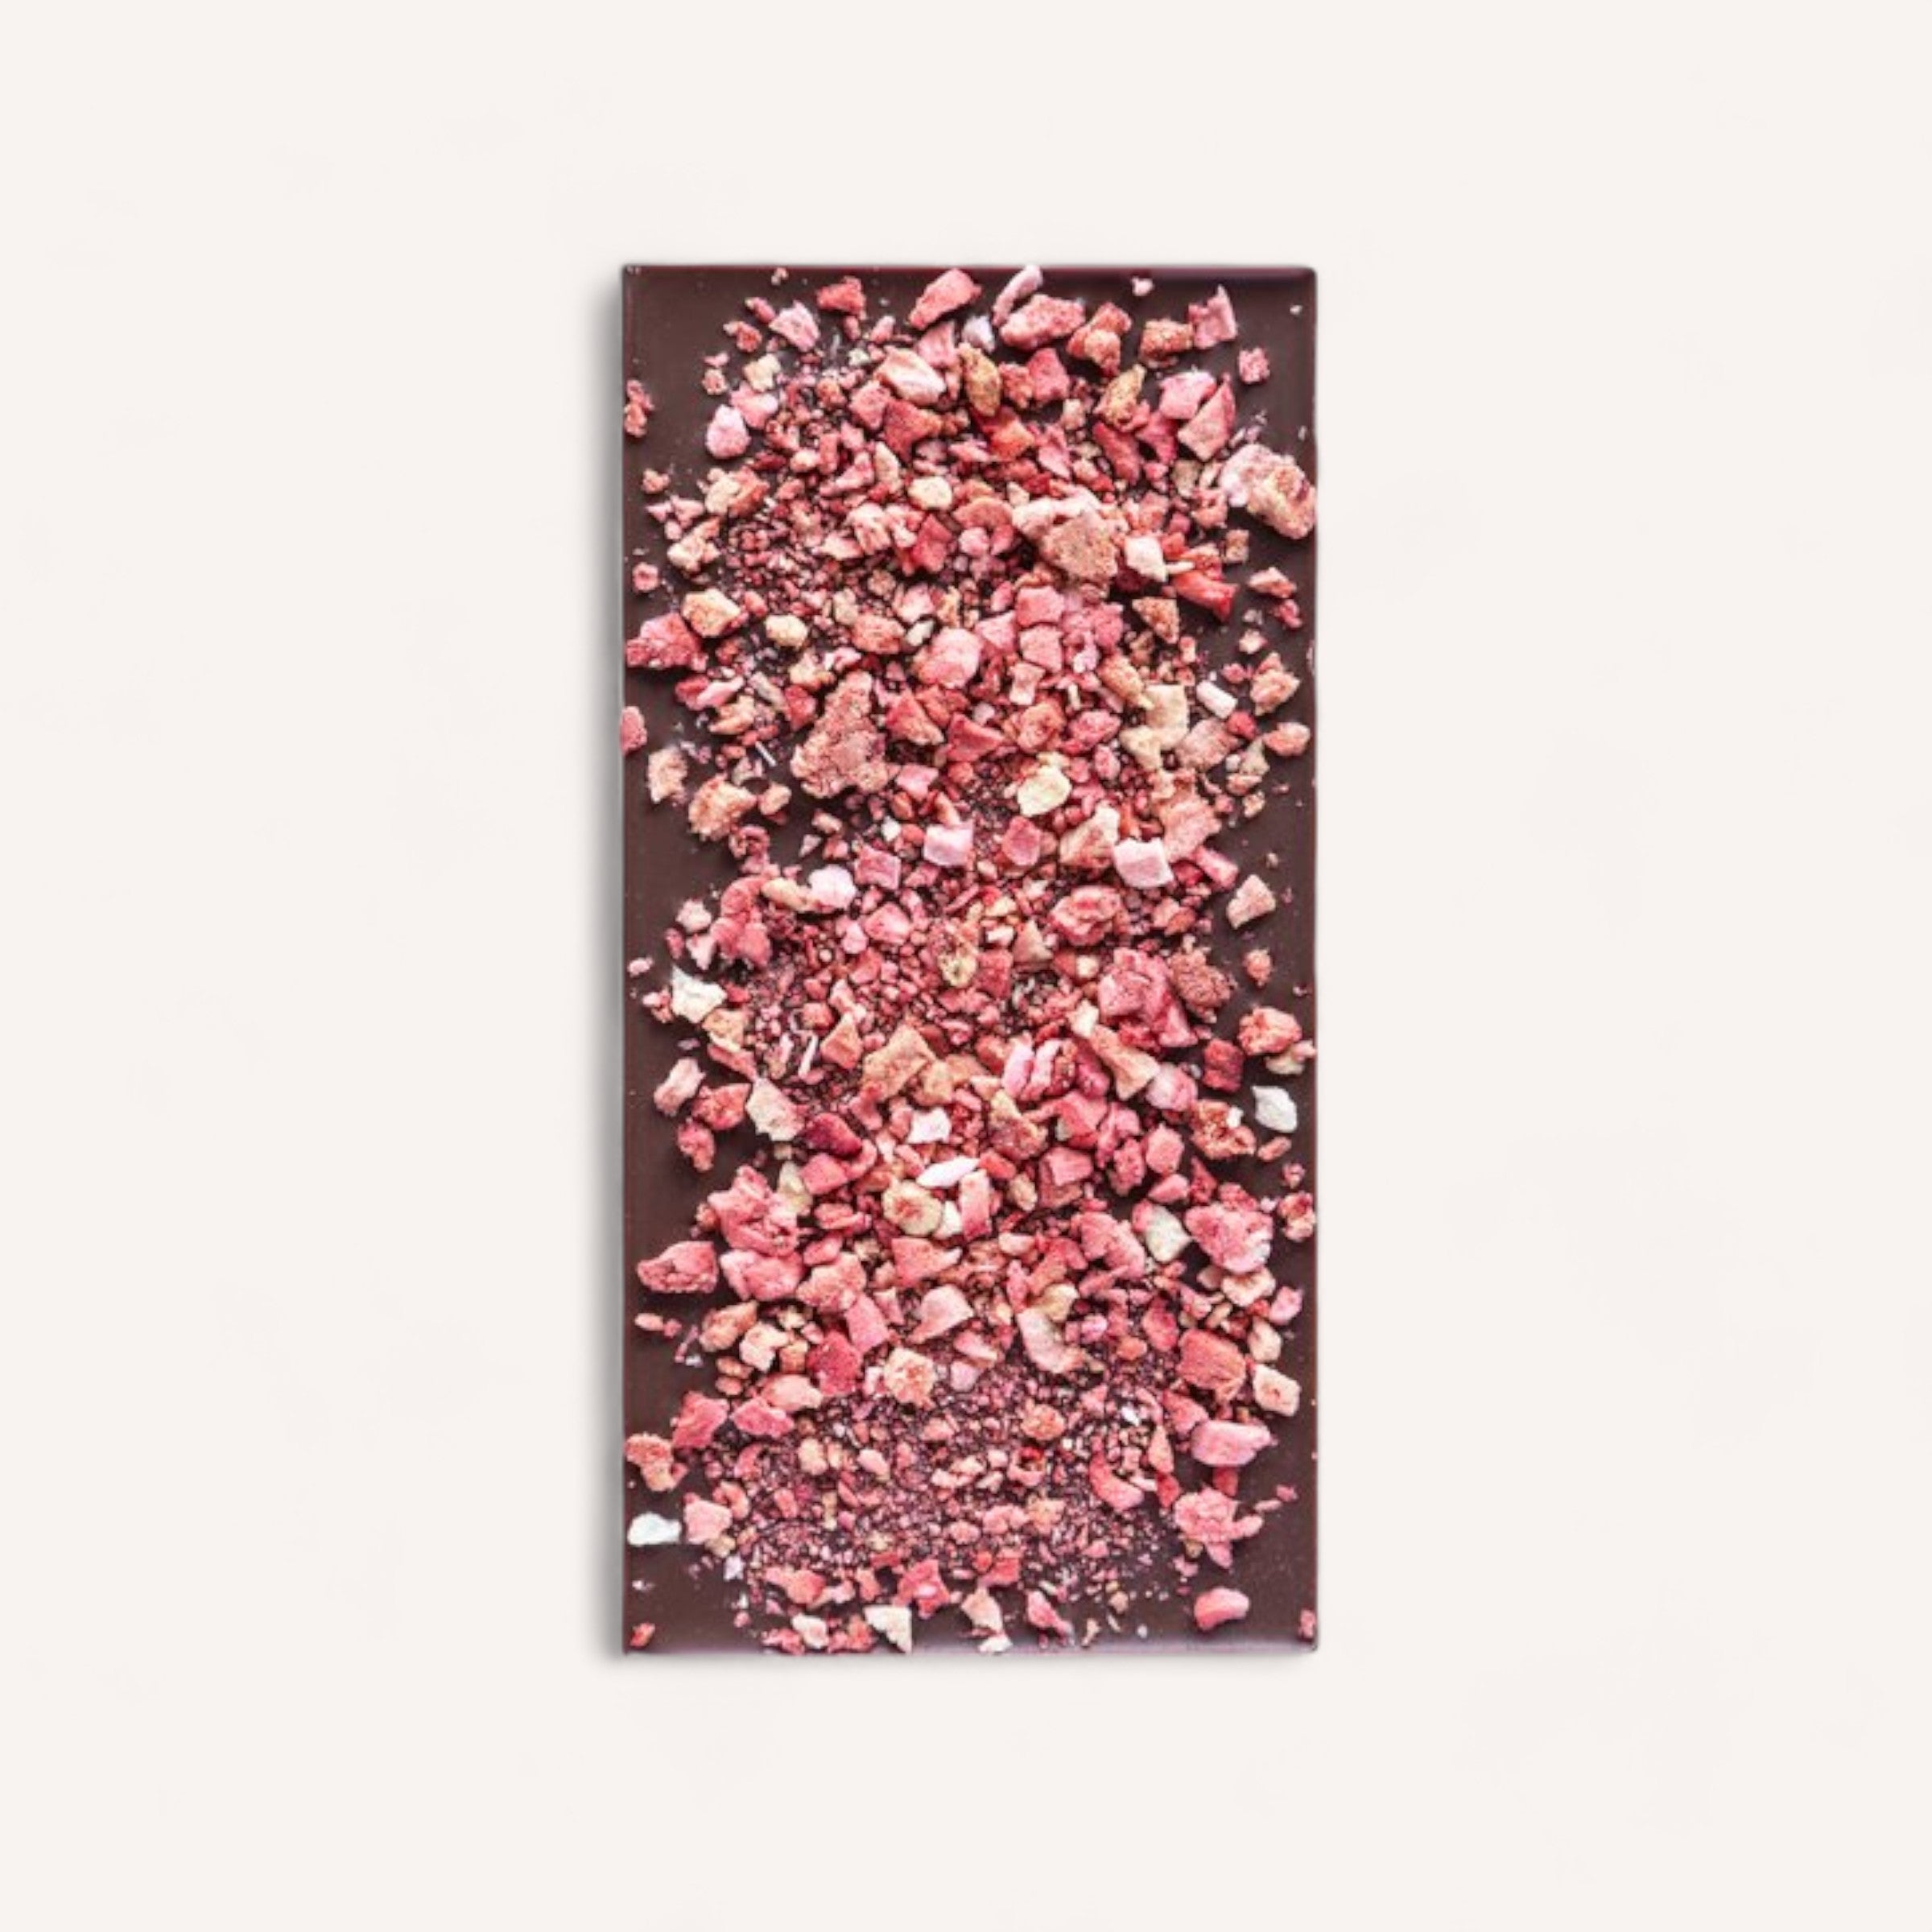 A luxurious Berry Milk Chocolate bar made from Tanzanian cacao, topped with a generous sprinkle of crushed New Zealand strawberries on a clean white background by Shirl & Moss.